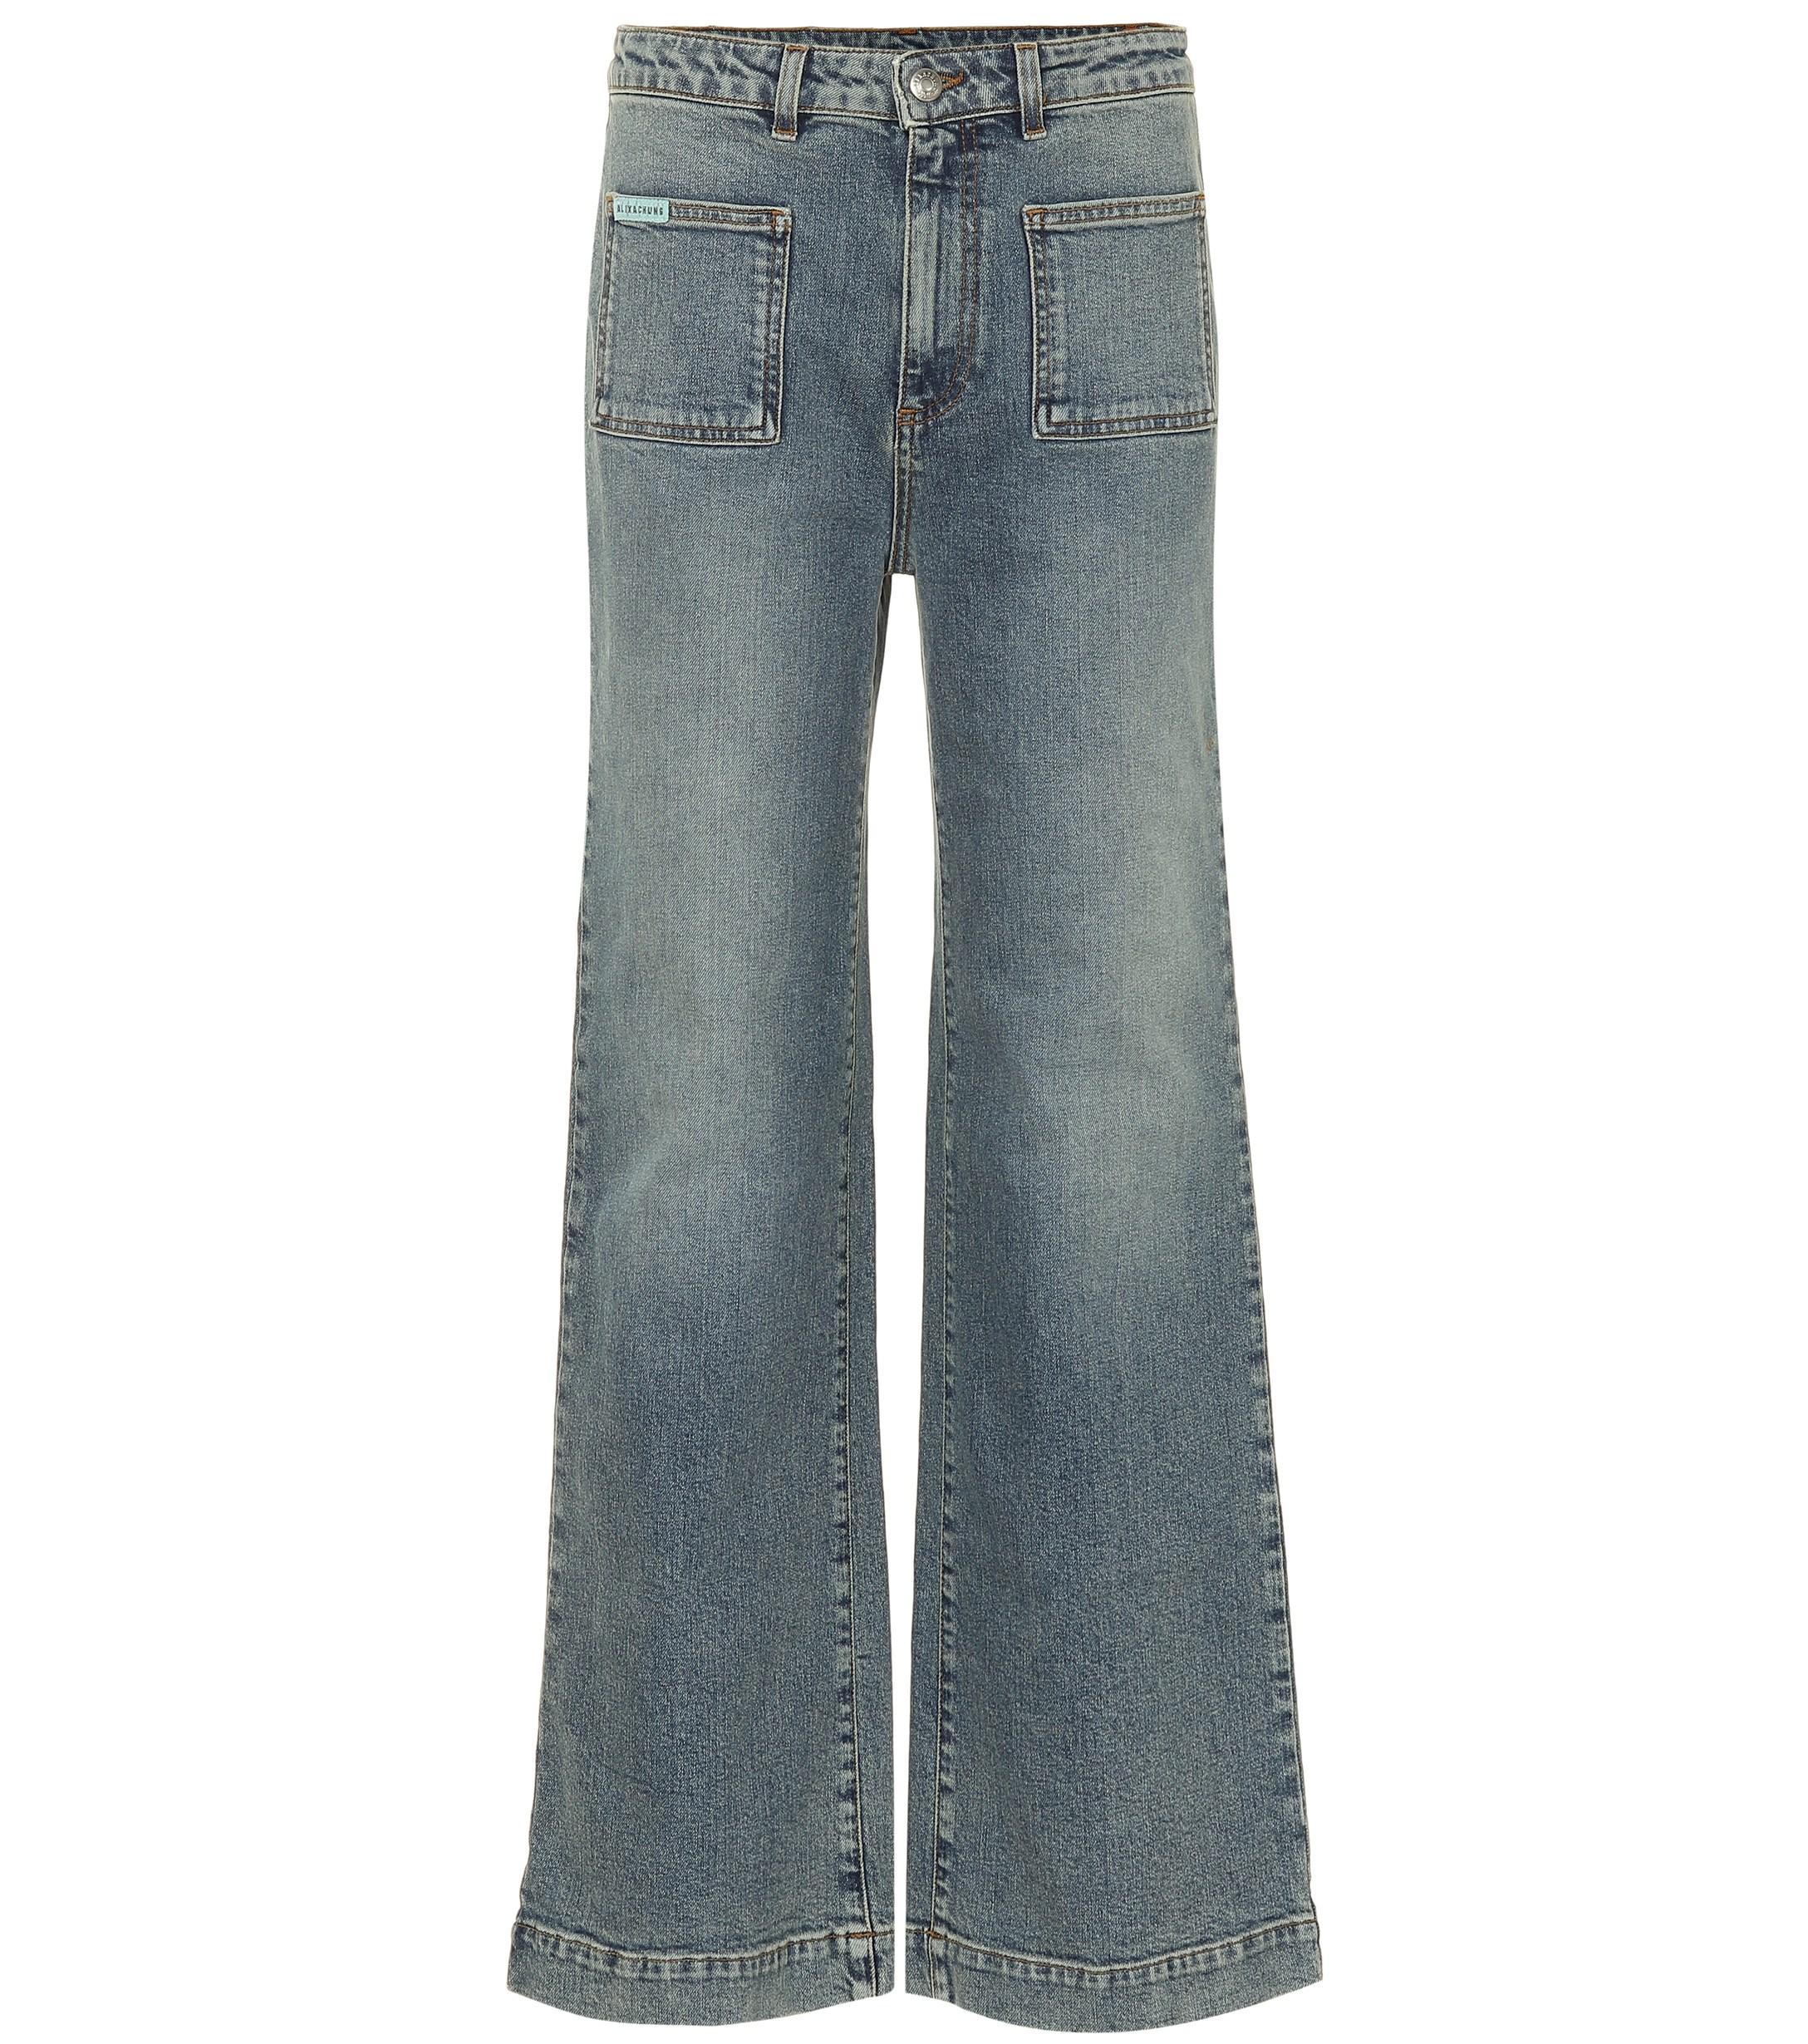 Lyst - ALEXACHUNG Mid-rise Wide-leg Jeans in Blue